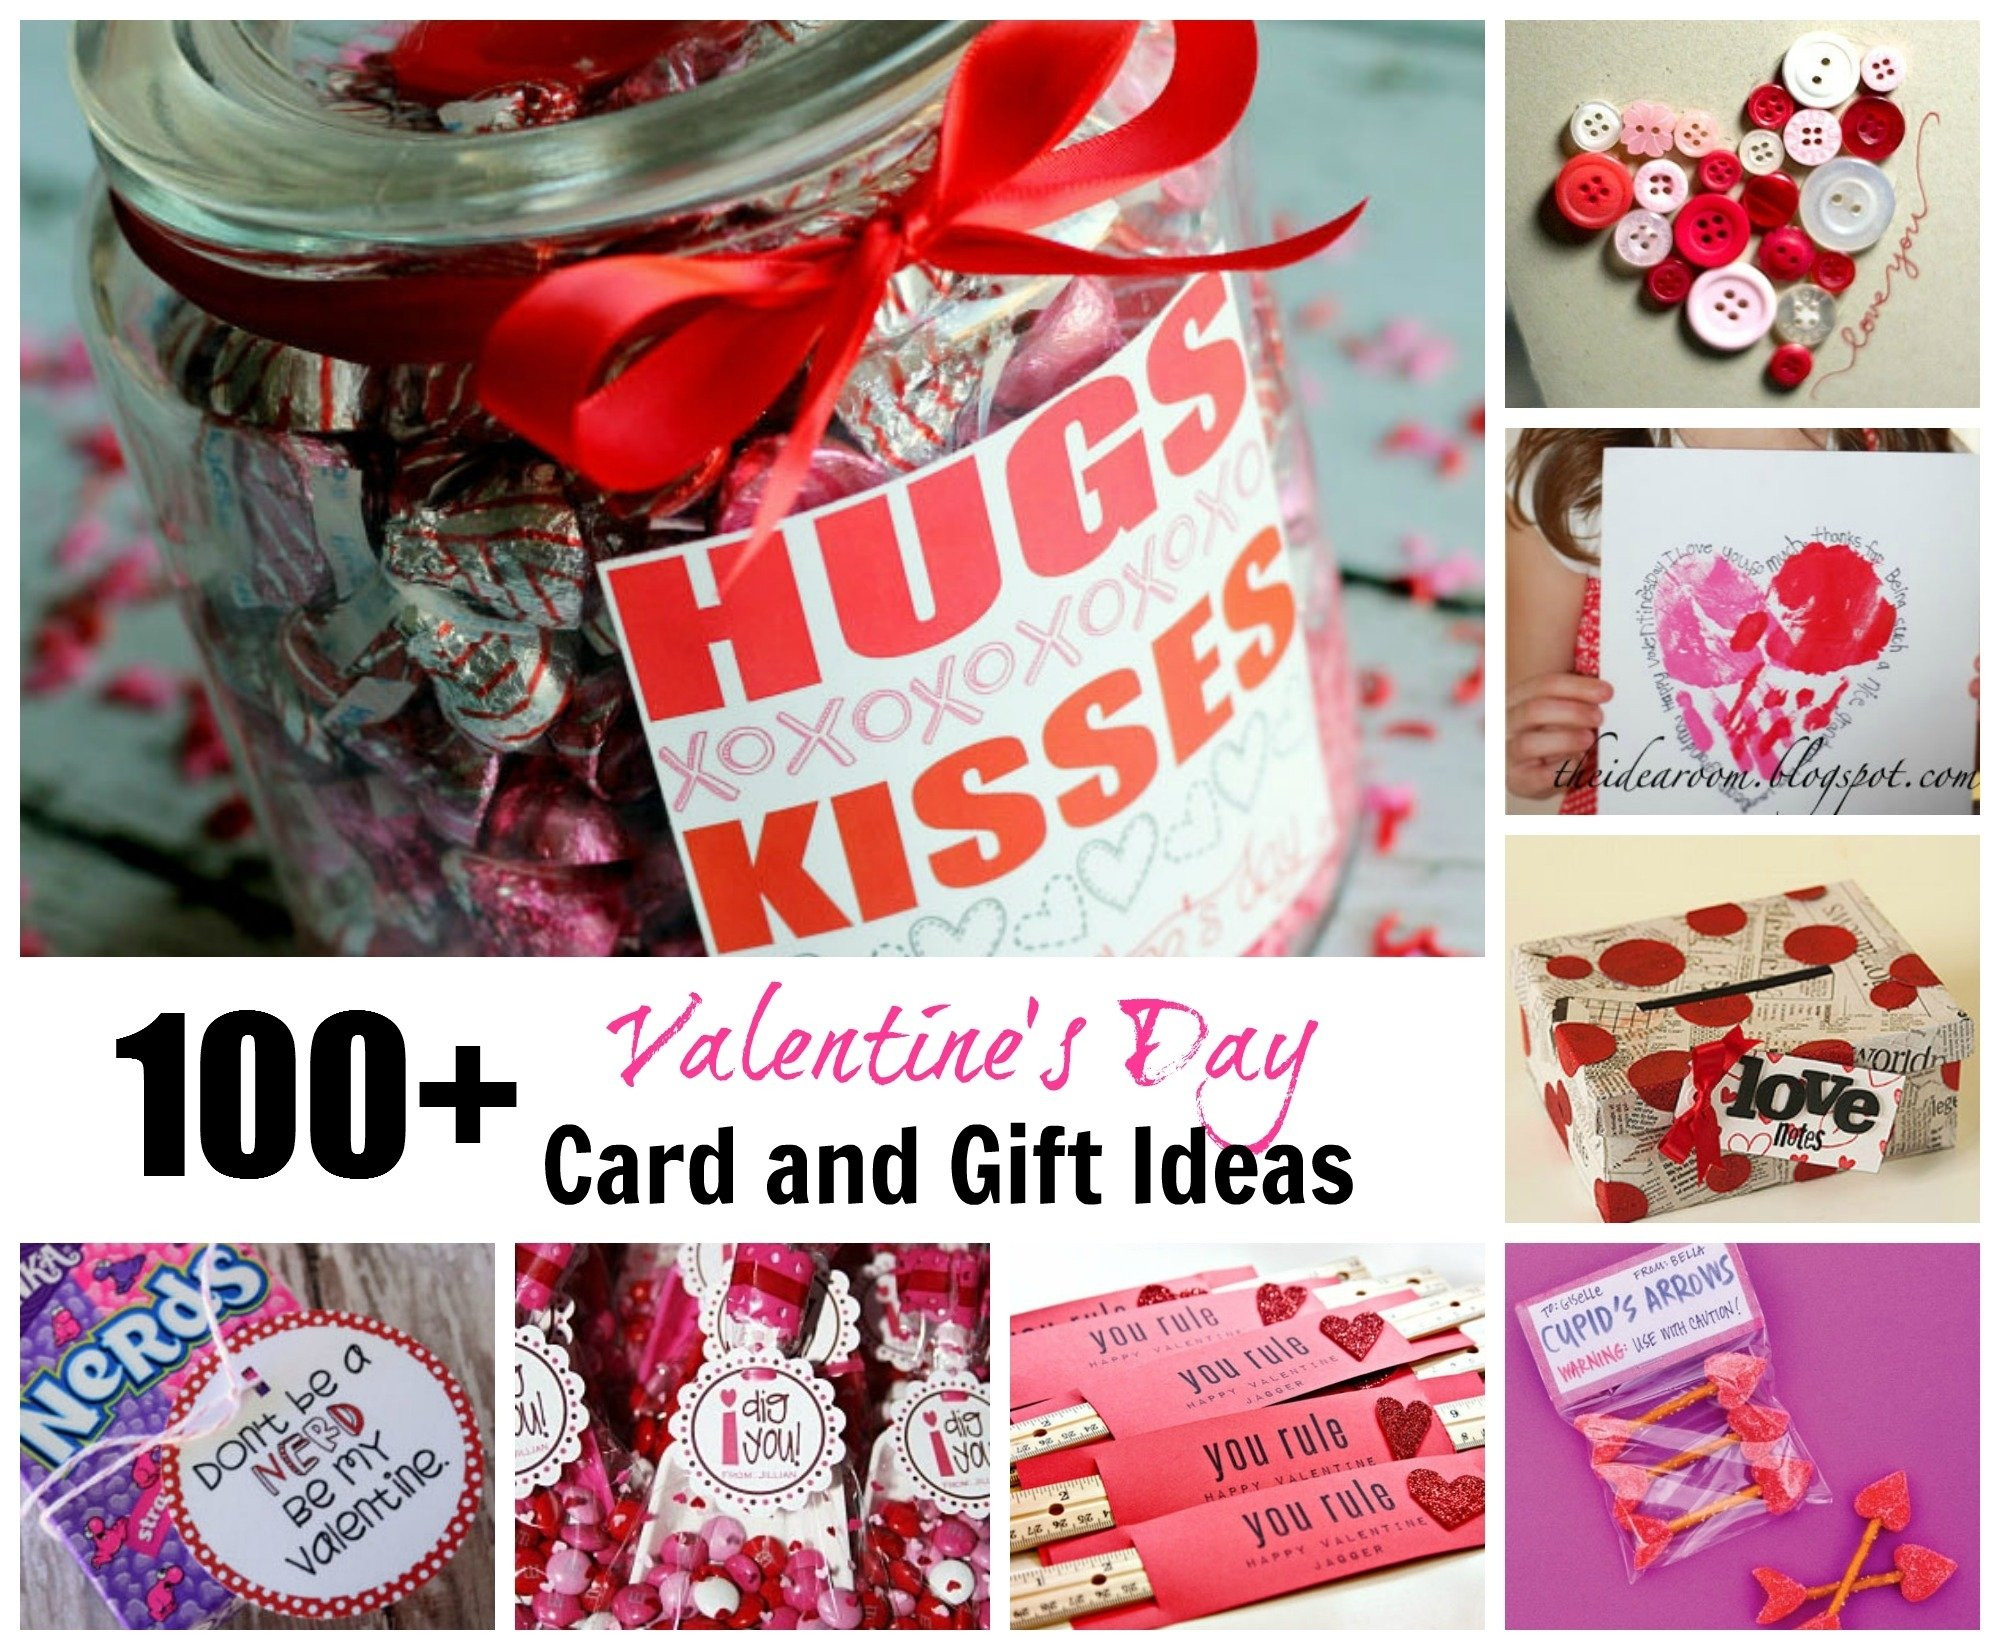 Valentine Day Handmade Gift Ideas
 10 Lovable Homemade Valentines Ideas For Him 2020